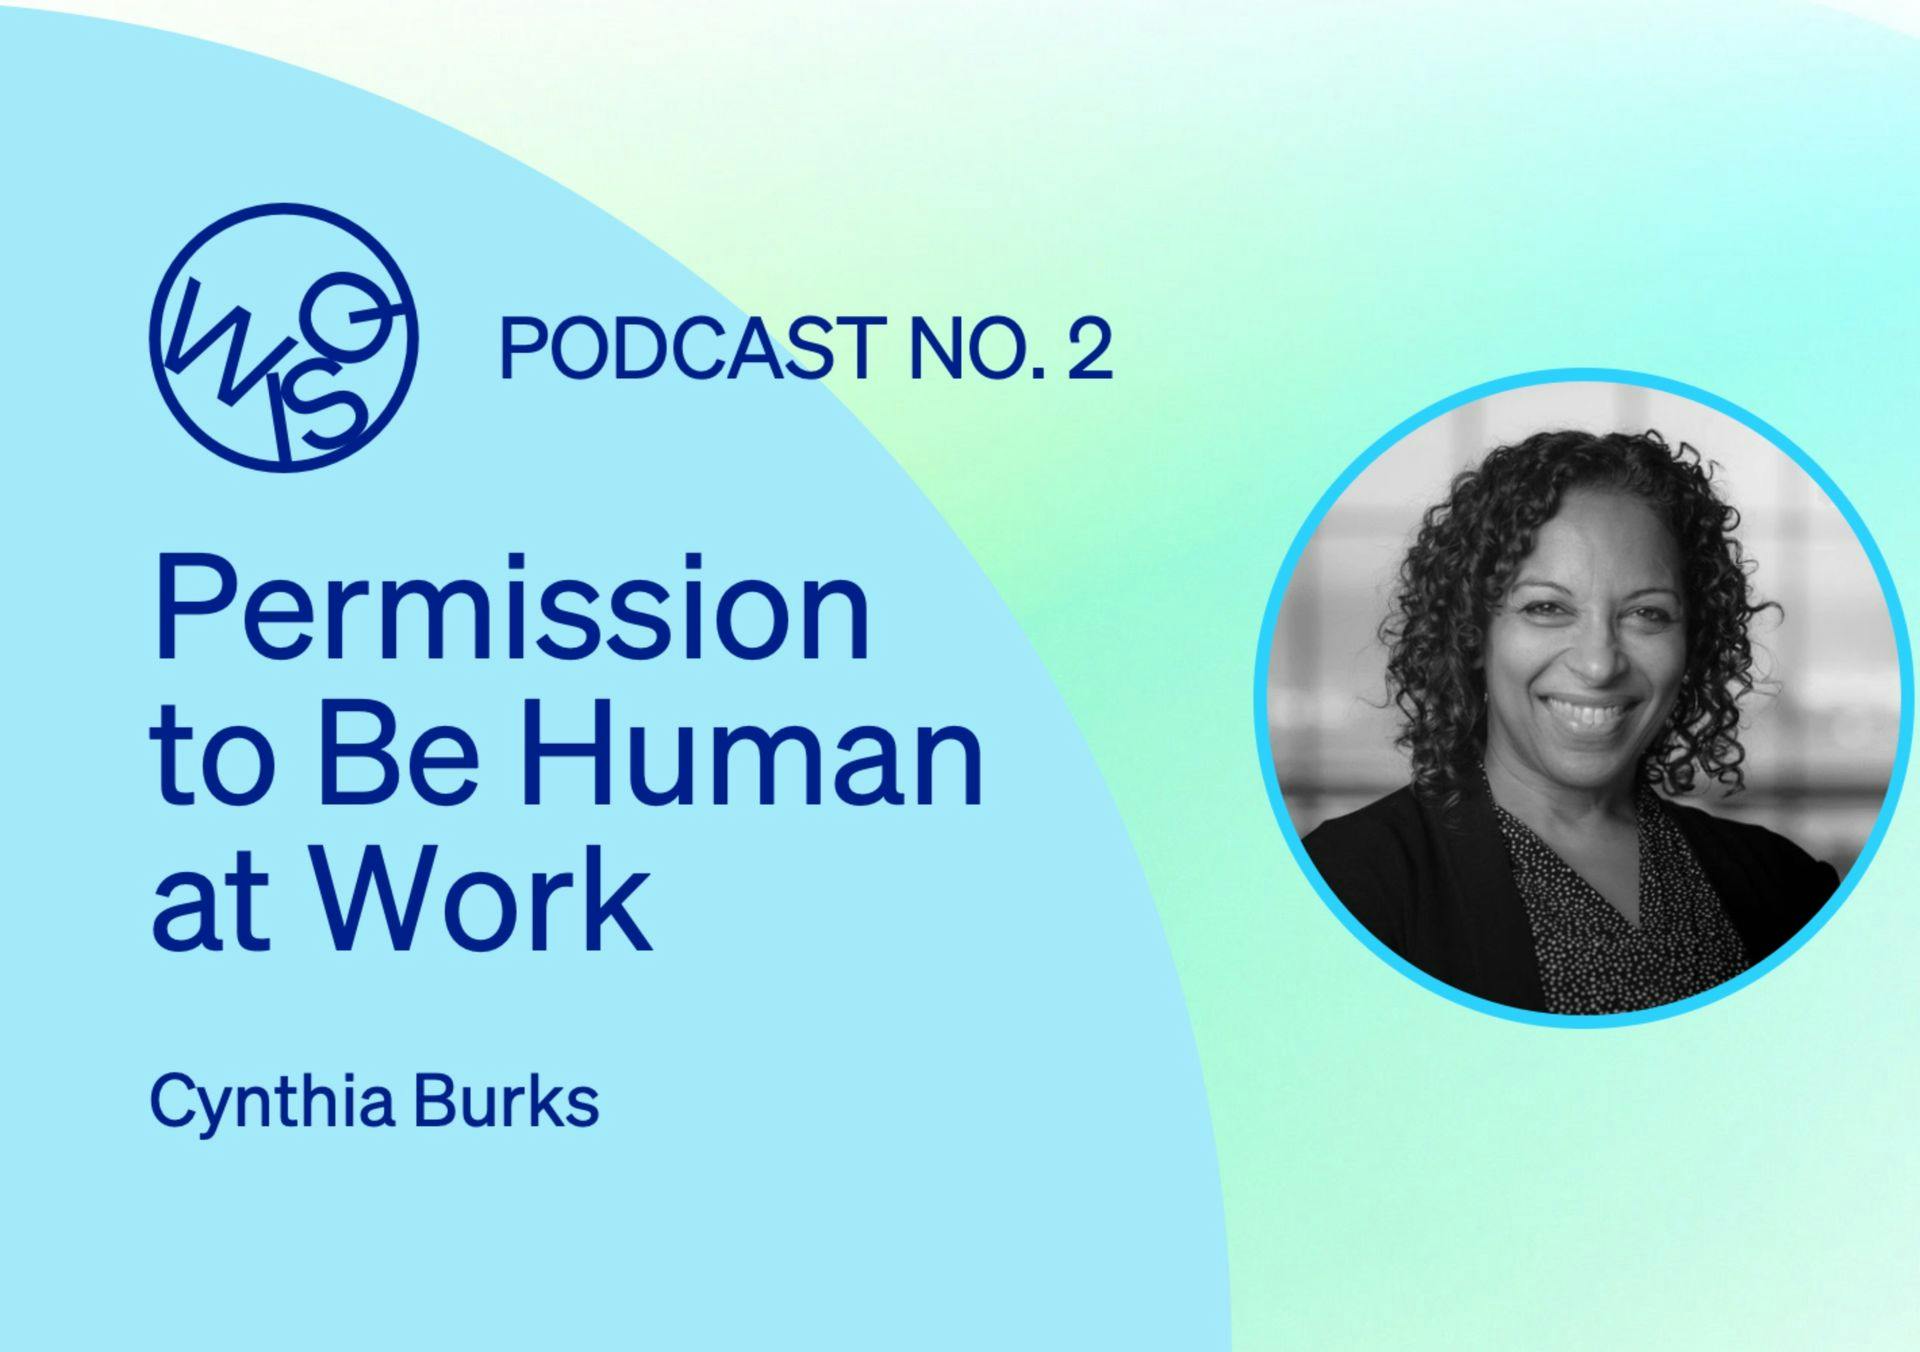 Permission to Be Human at Work with Cynthia Burks